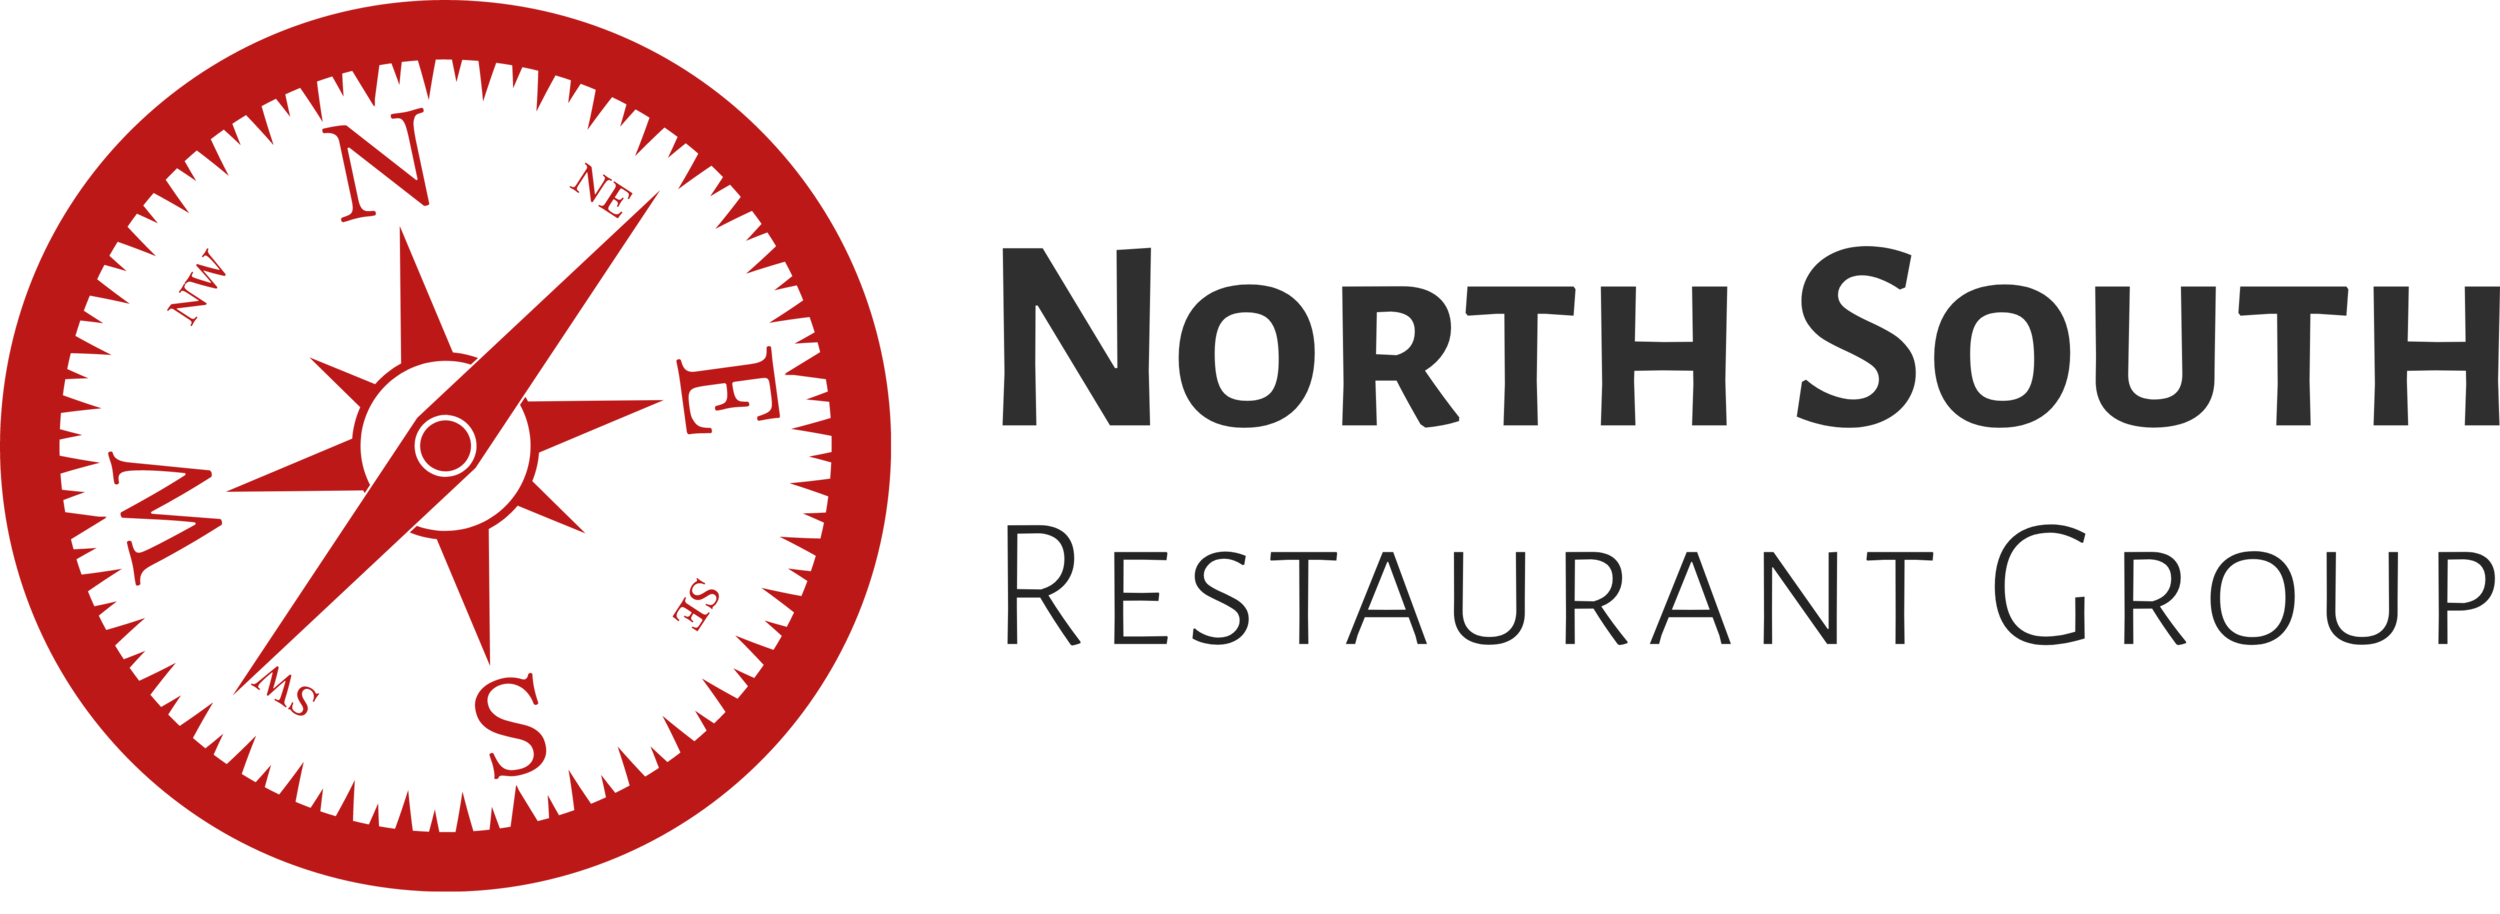 North South Restaurant Group